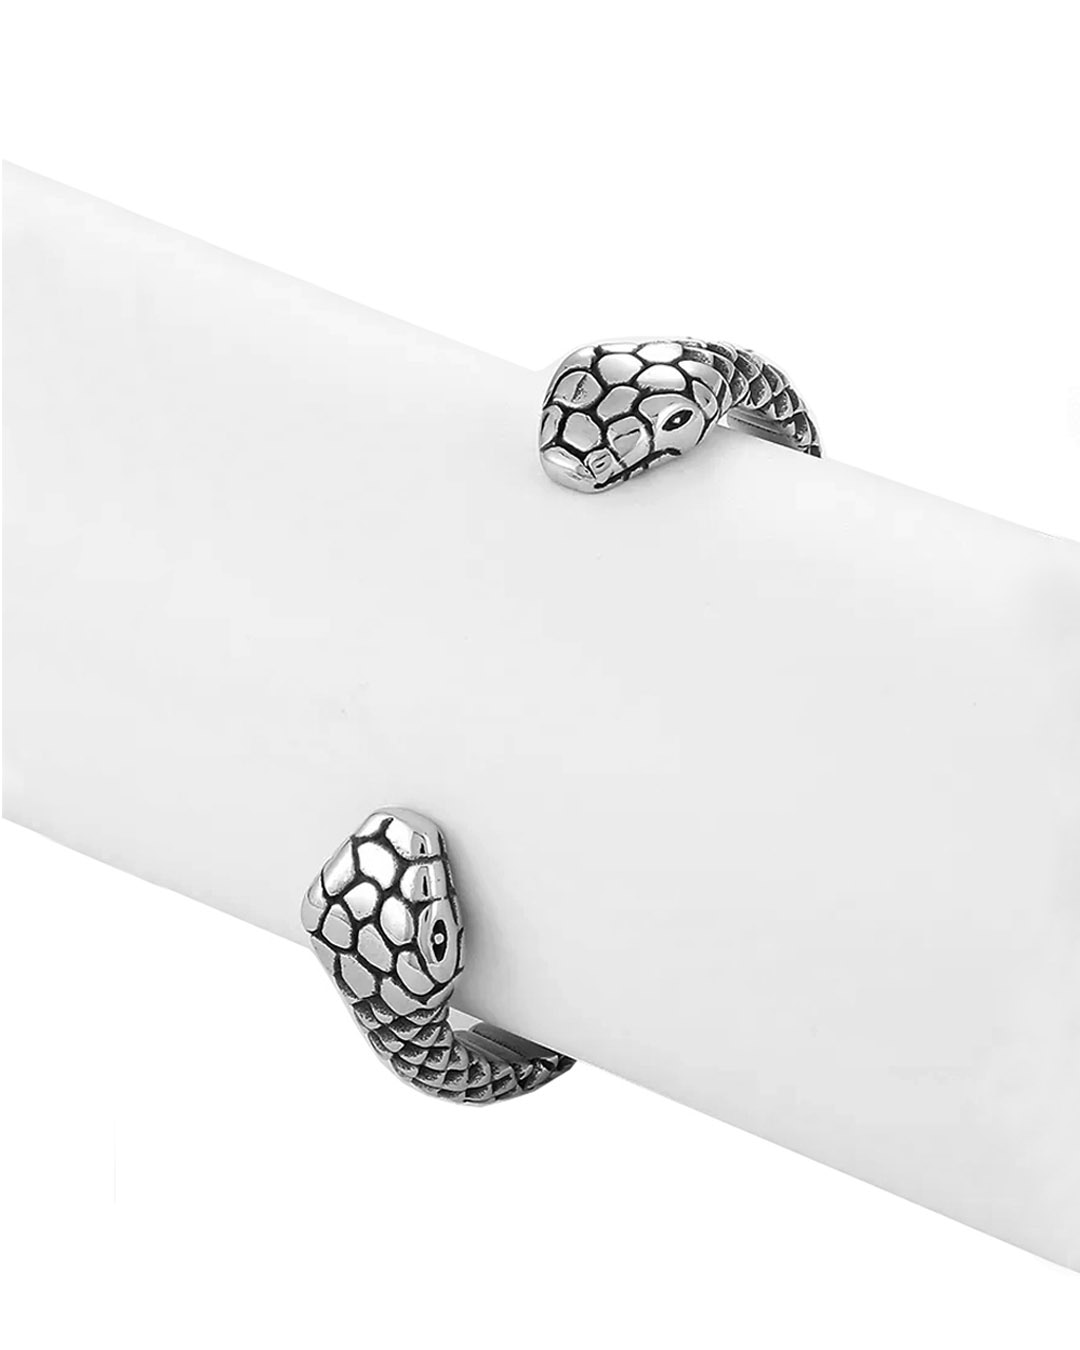 Two headed snake cuff bracelet with intricate details on a grey display stand for bracelets.